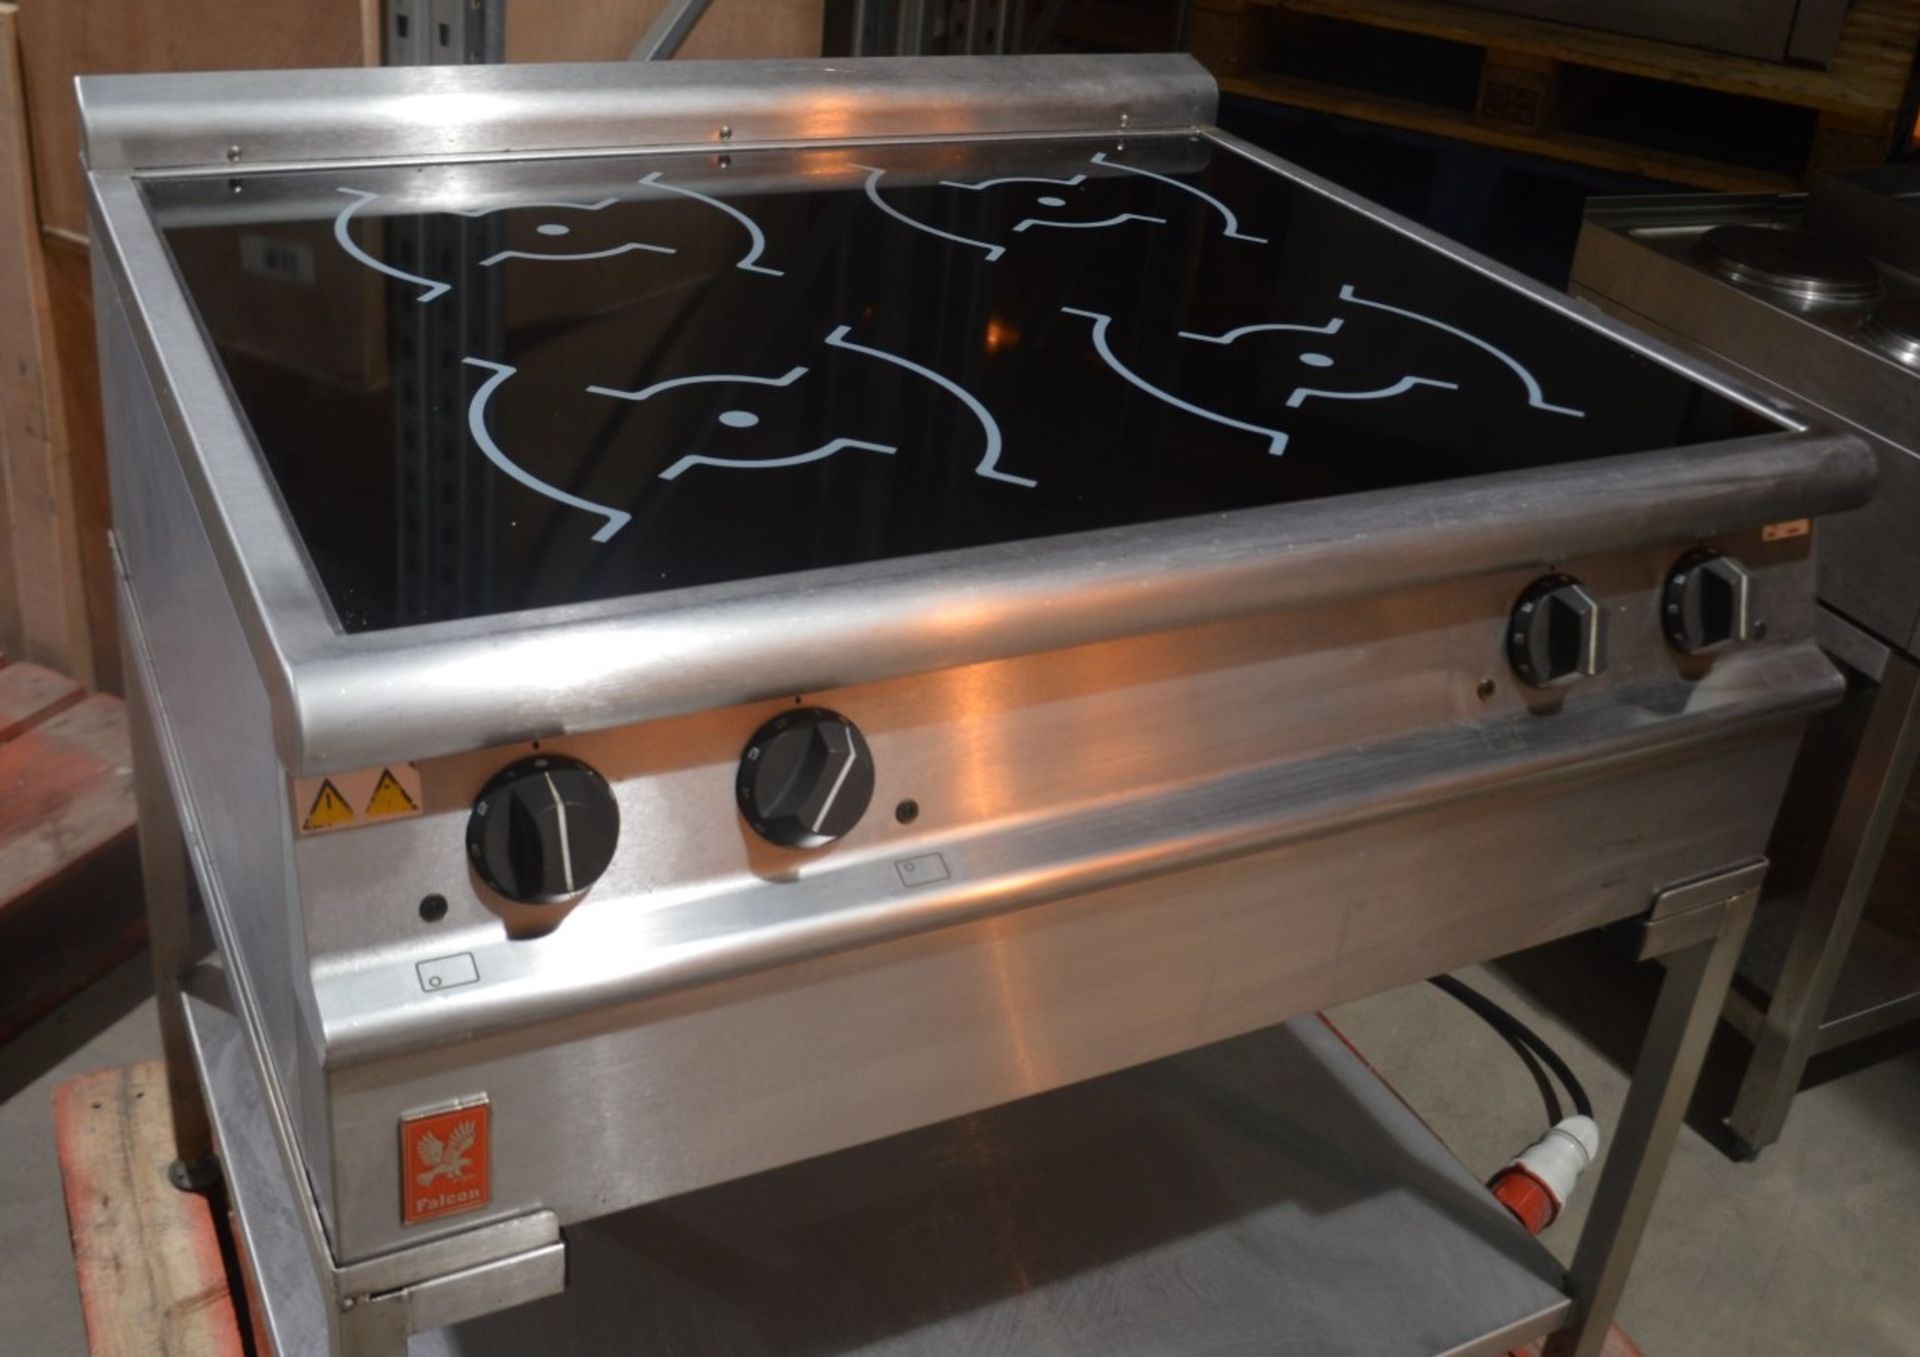 1 x FALCON 'Dominator ' Stainless Steel Commercial Induction Hob - Model: E3904i - Image 4 of 8